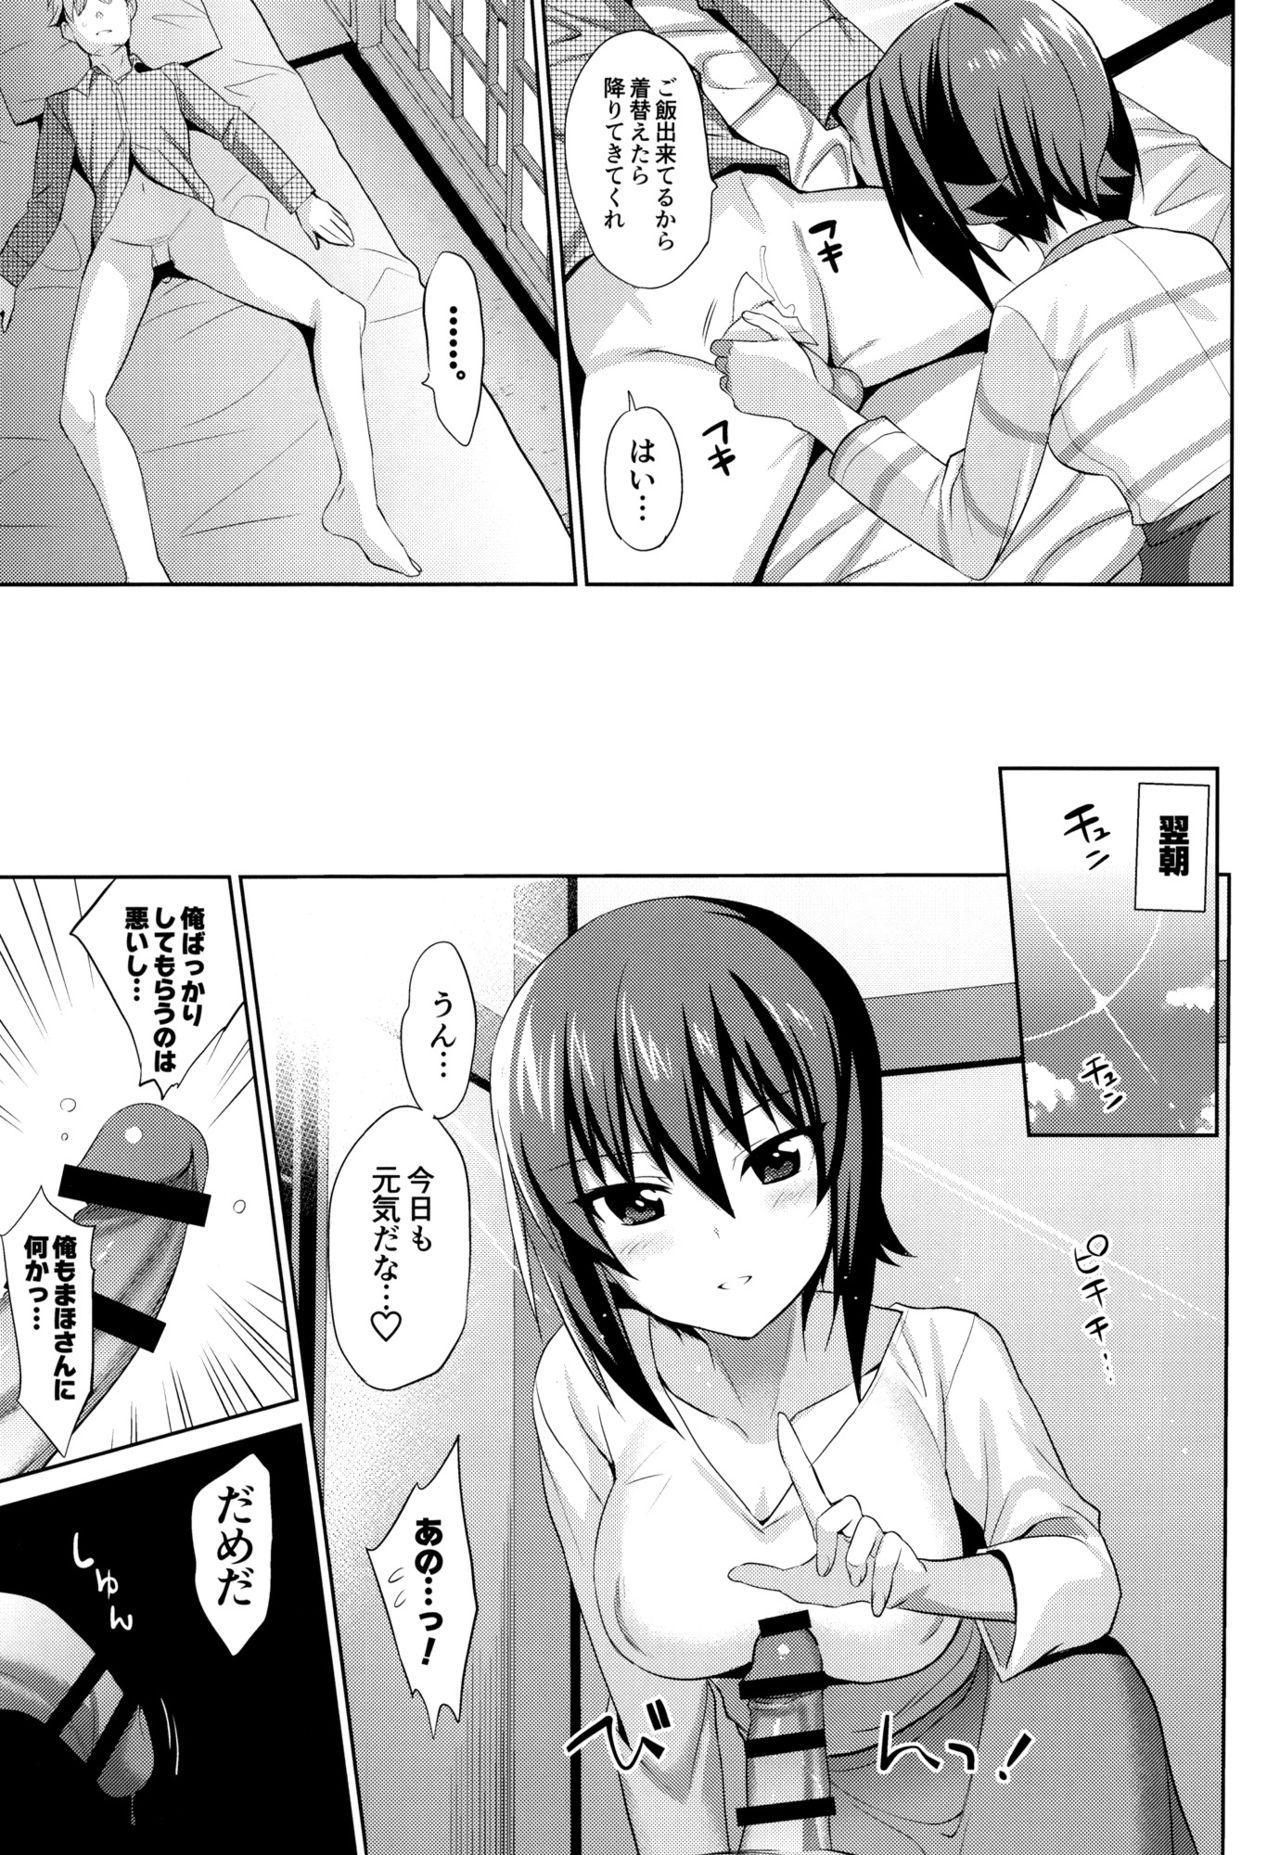 She LET ME LOVE YOU TOO - Girls und panzer Puto - Page 10